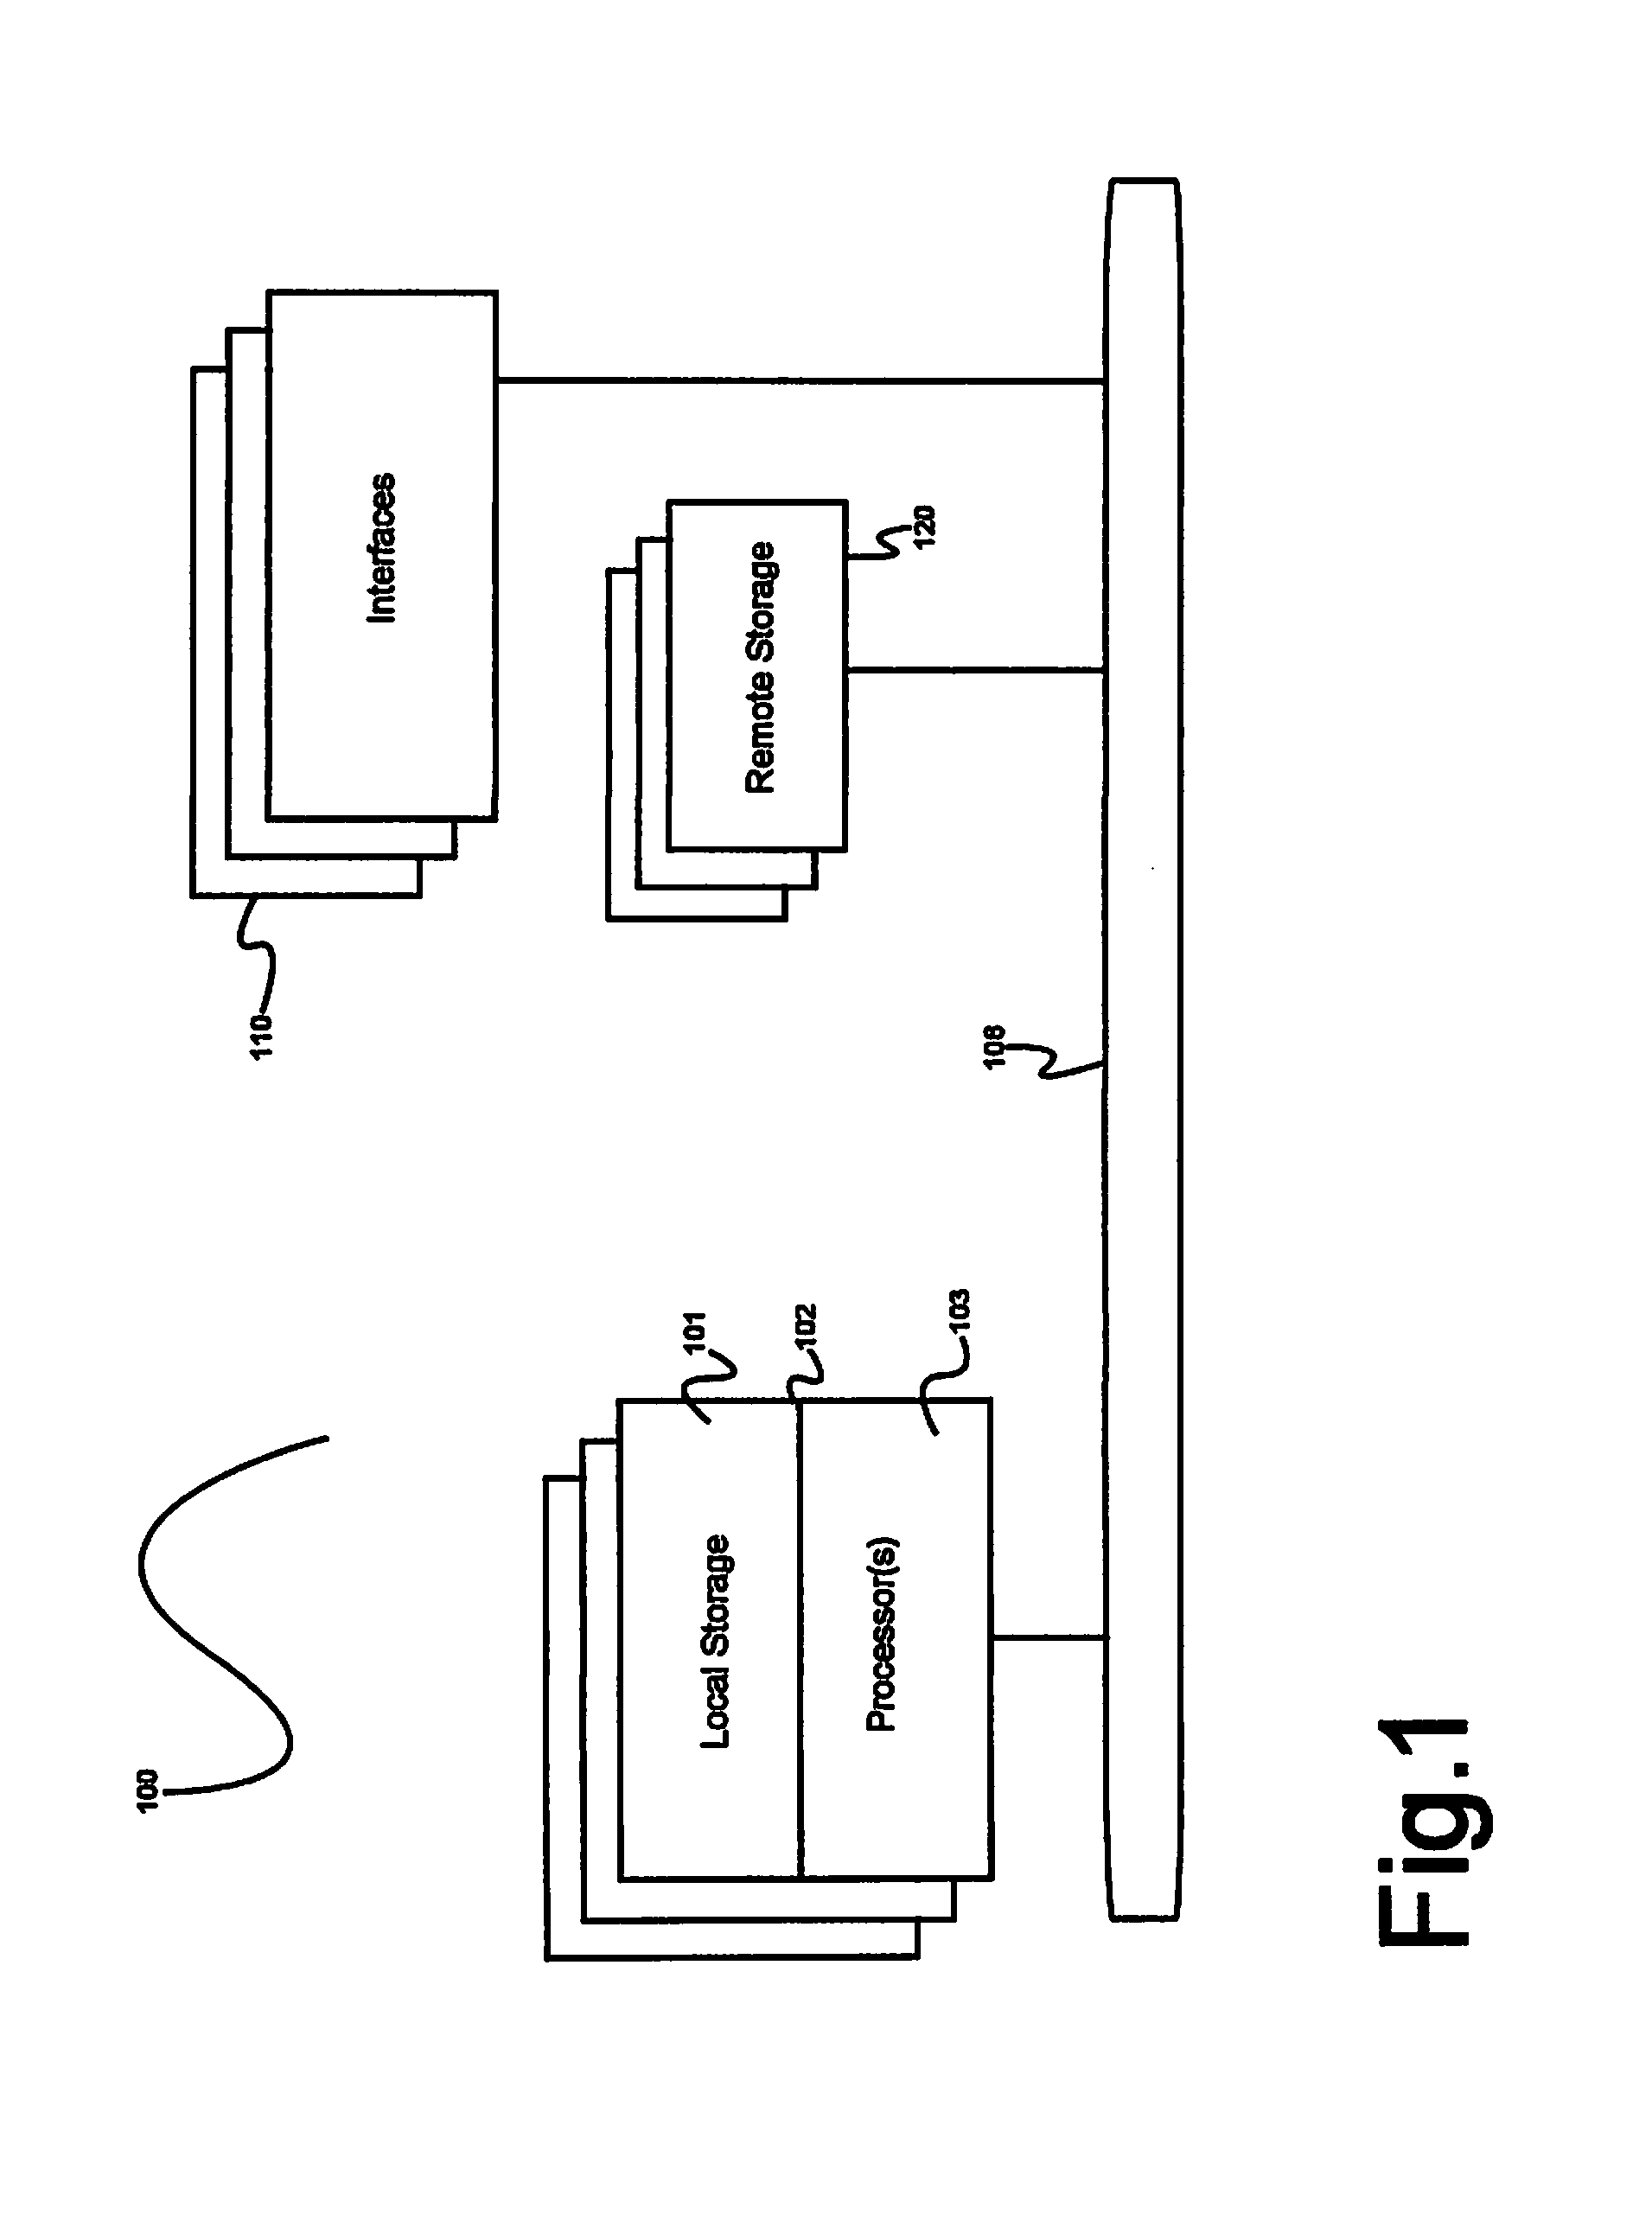 System and method for automated voice quality testing